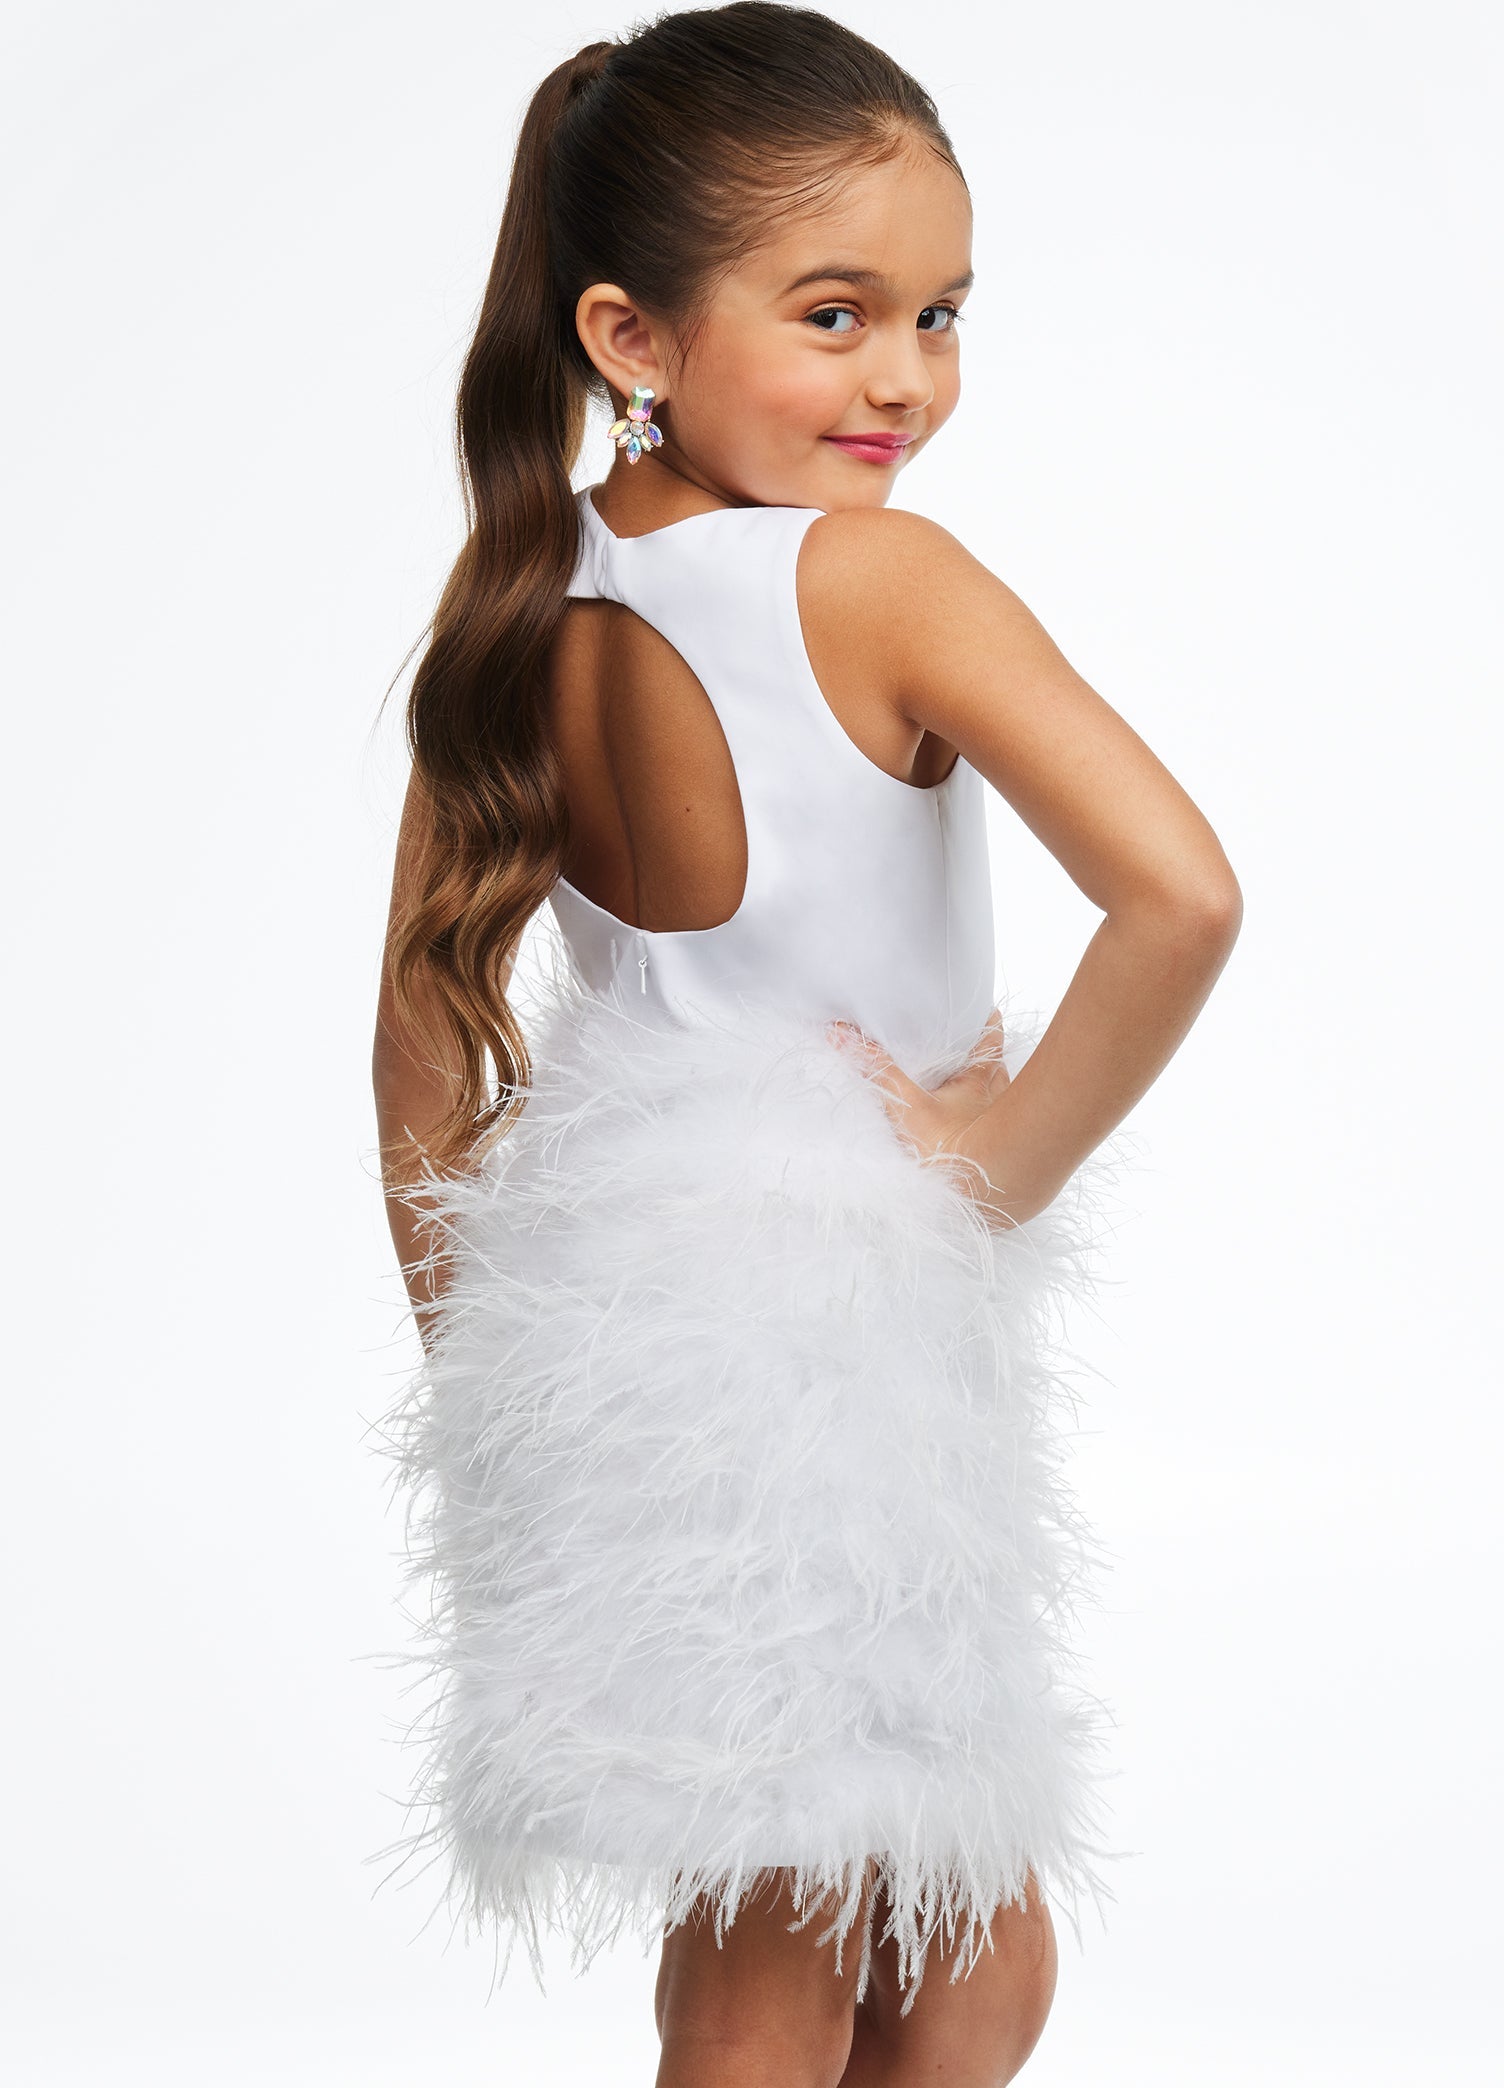 Women's Feather Skirt Sexy Party Prom Fur Skirt - The Little